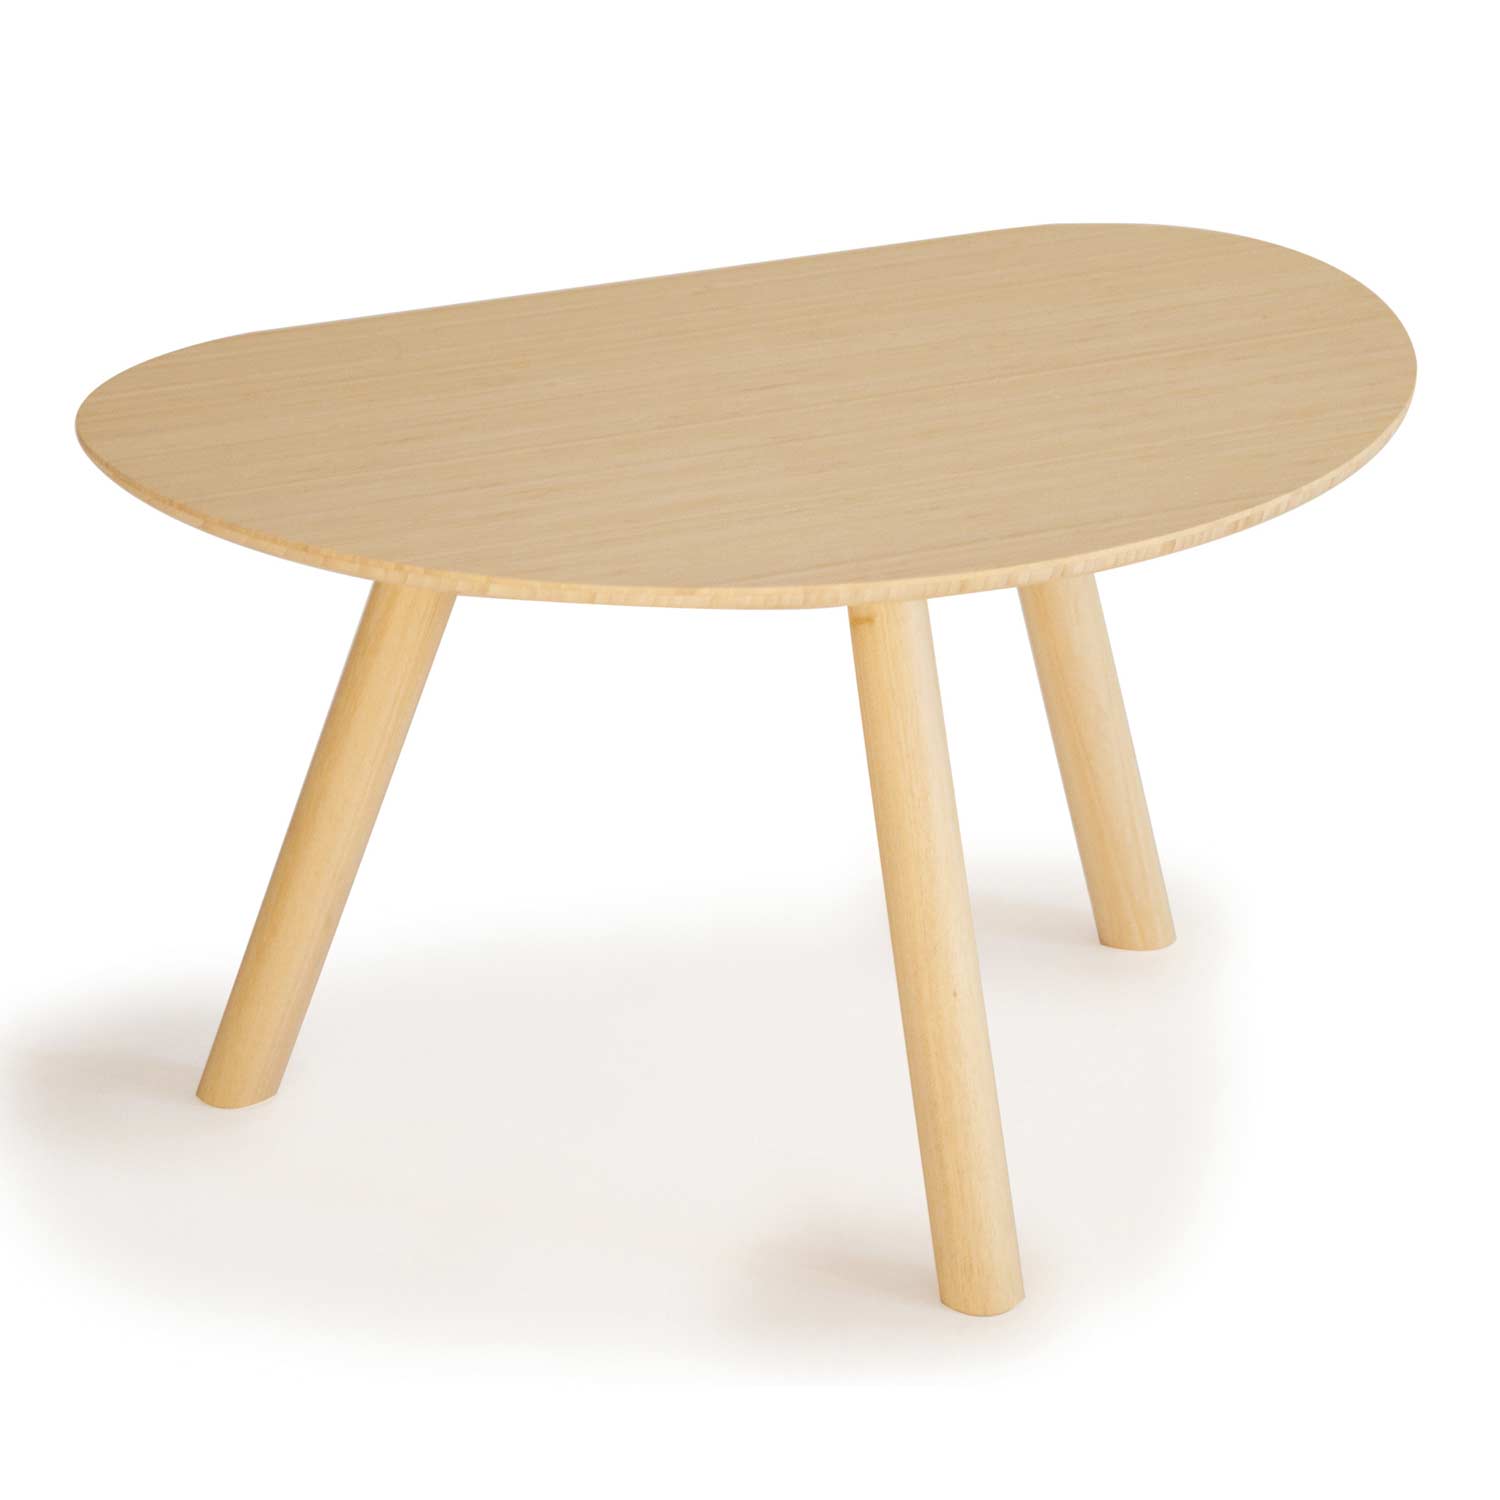 Versatile Bamboo Furniture - Sustainable and Chic